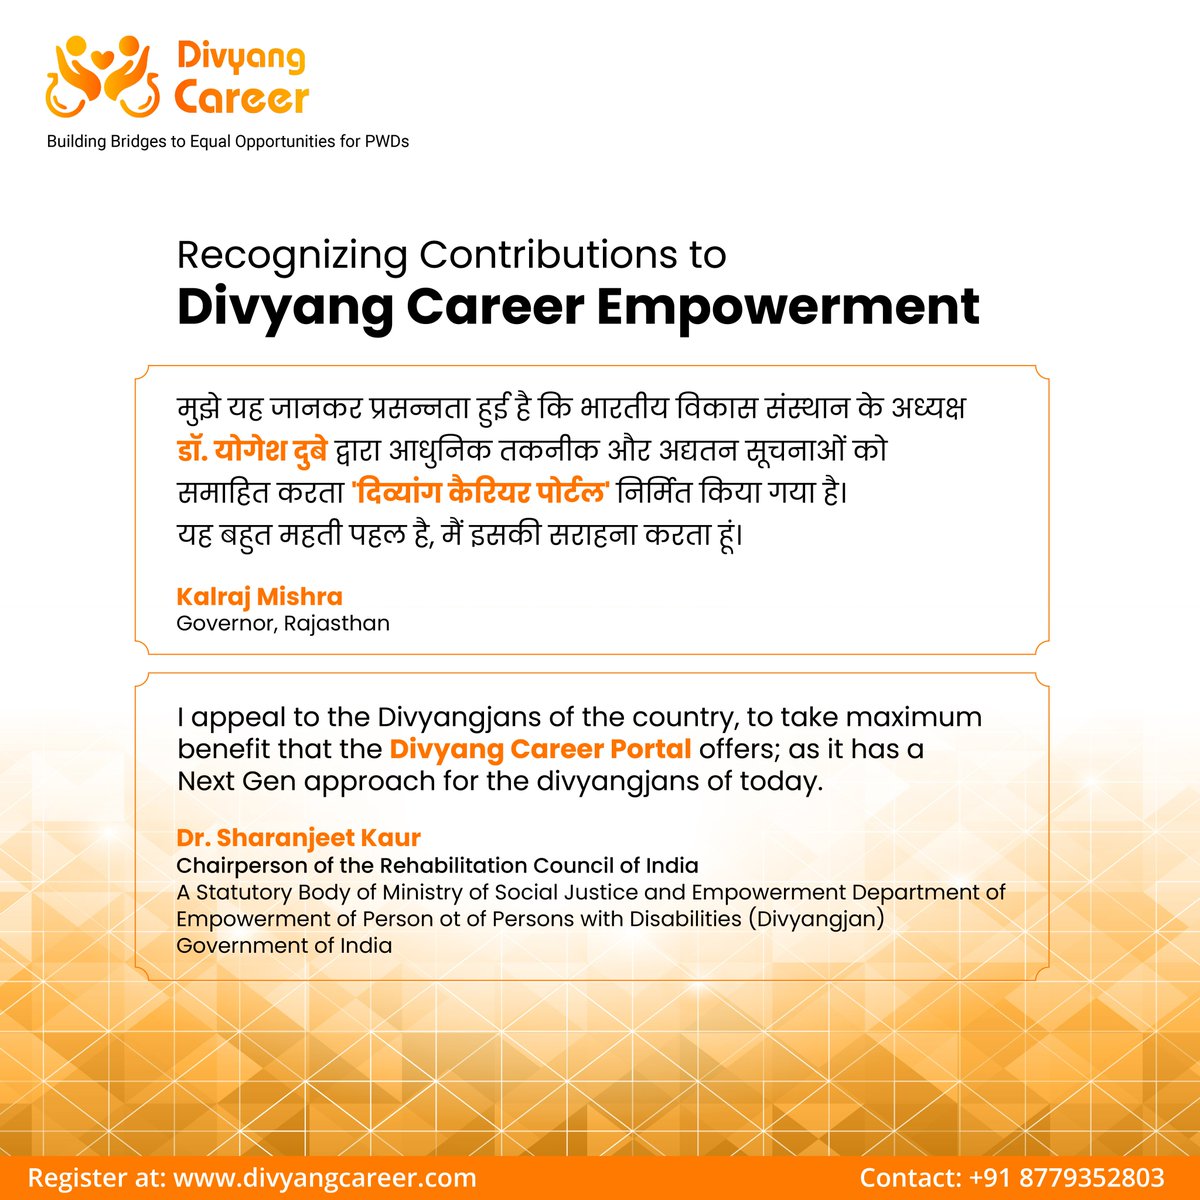 At Divyang Career, we are creating a very supportive culture for Divyang individuals. We believe that by embracing diversity and fostering inclusion, we unlock limitless potential and drive innovation forward. 
#pwdjobs #believe #careerjobs #jobseekers #supportive #divyangcareer